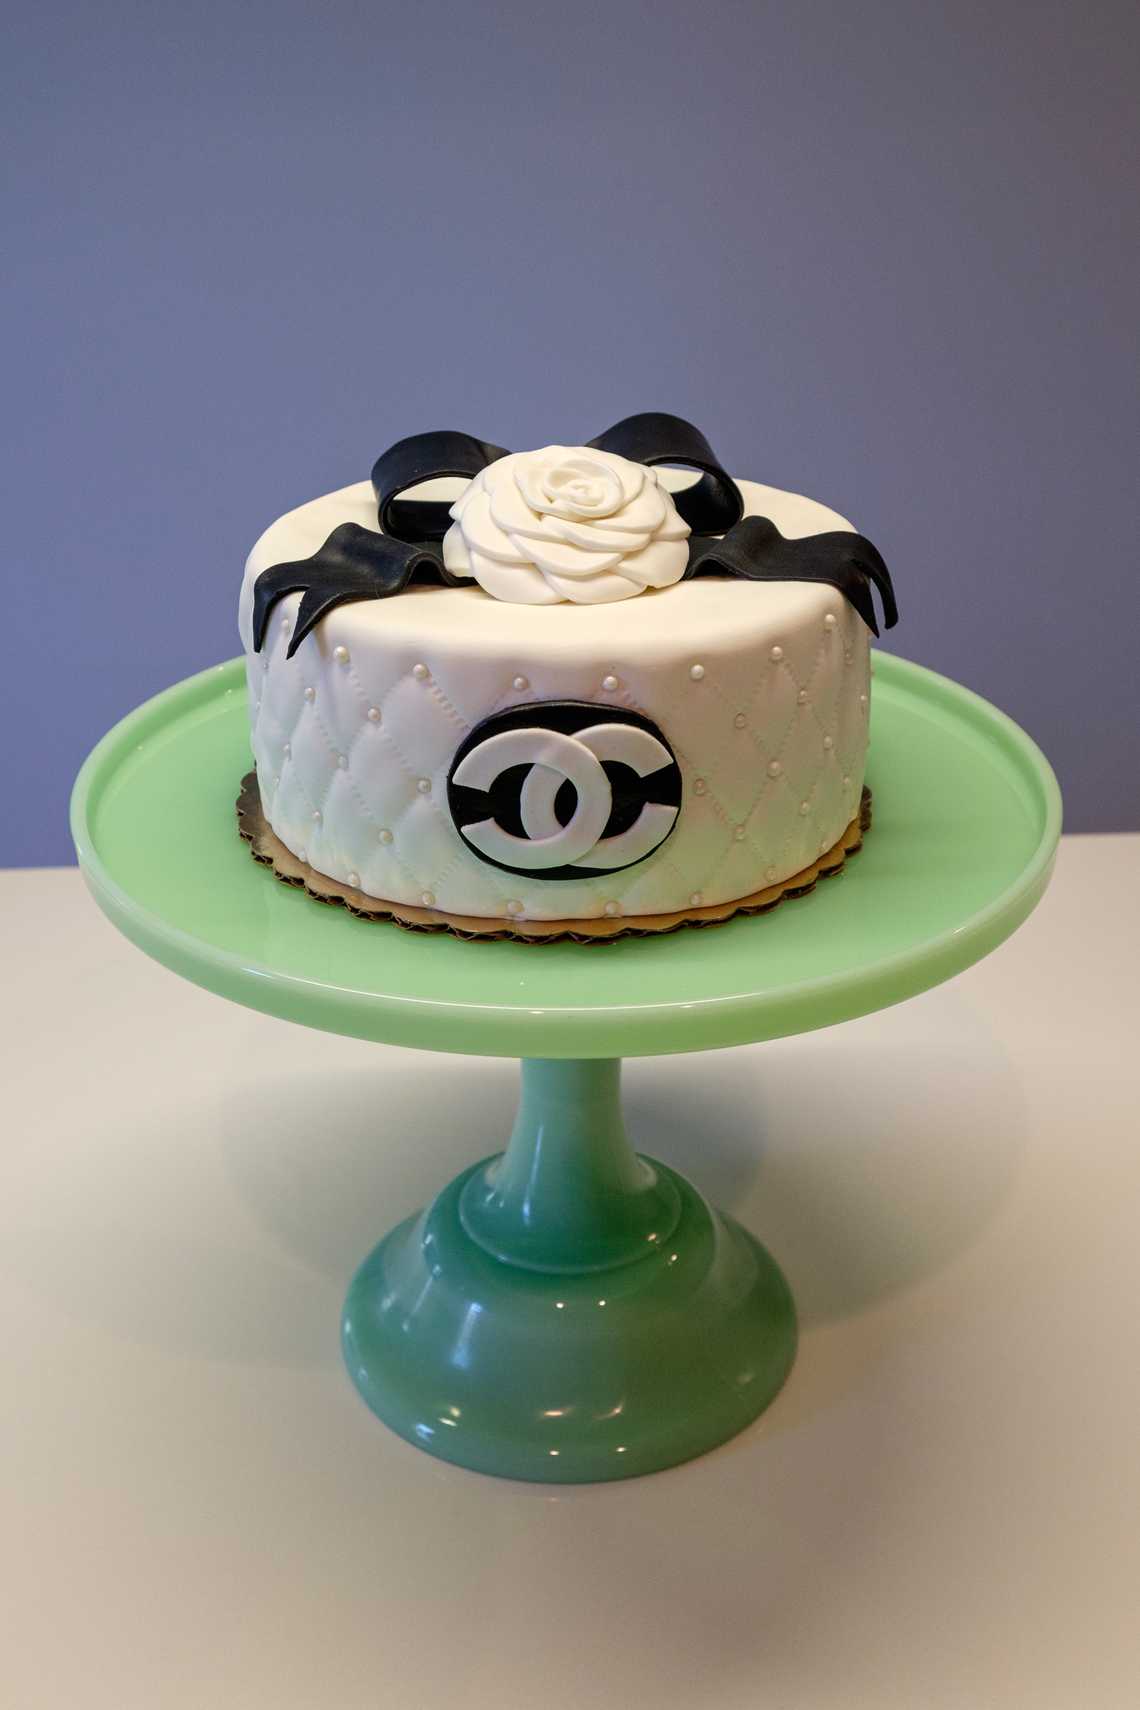 Chanel Cake — August 27, 2016